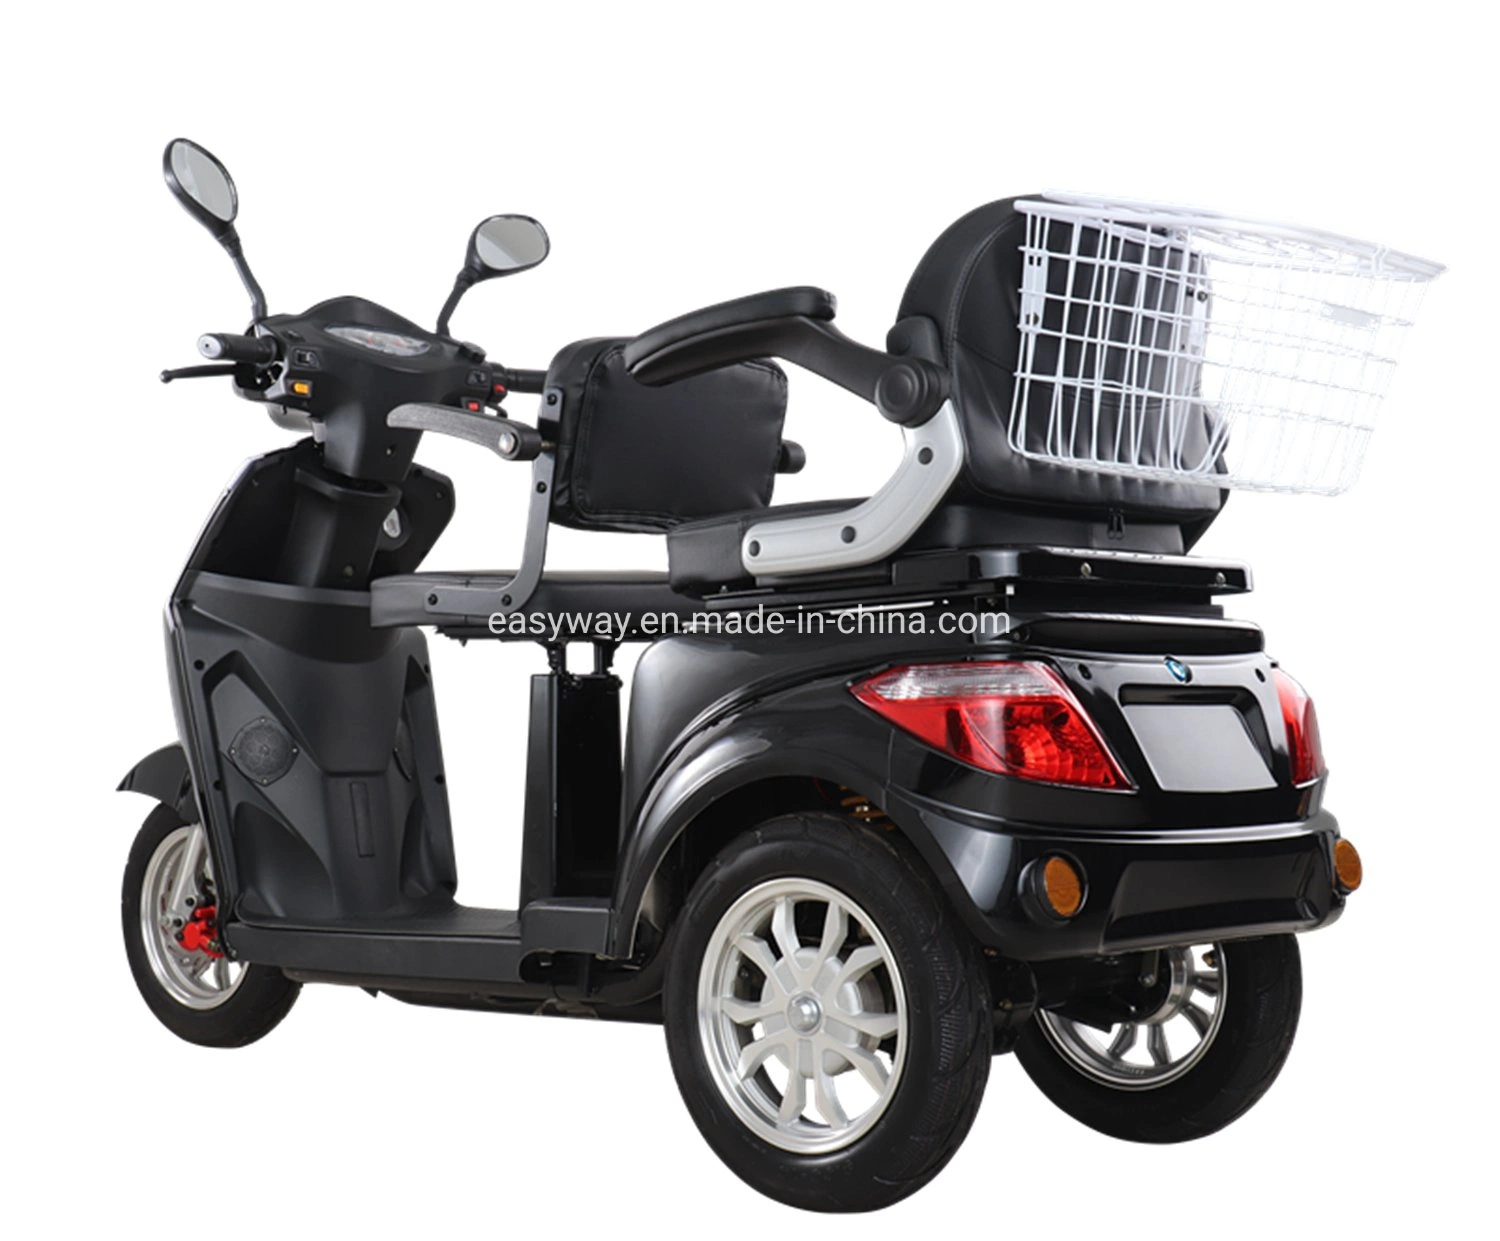 3-Wheel New Design Electric Mobility Scooter with 1000W Motor